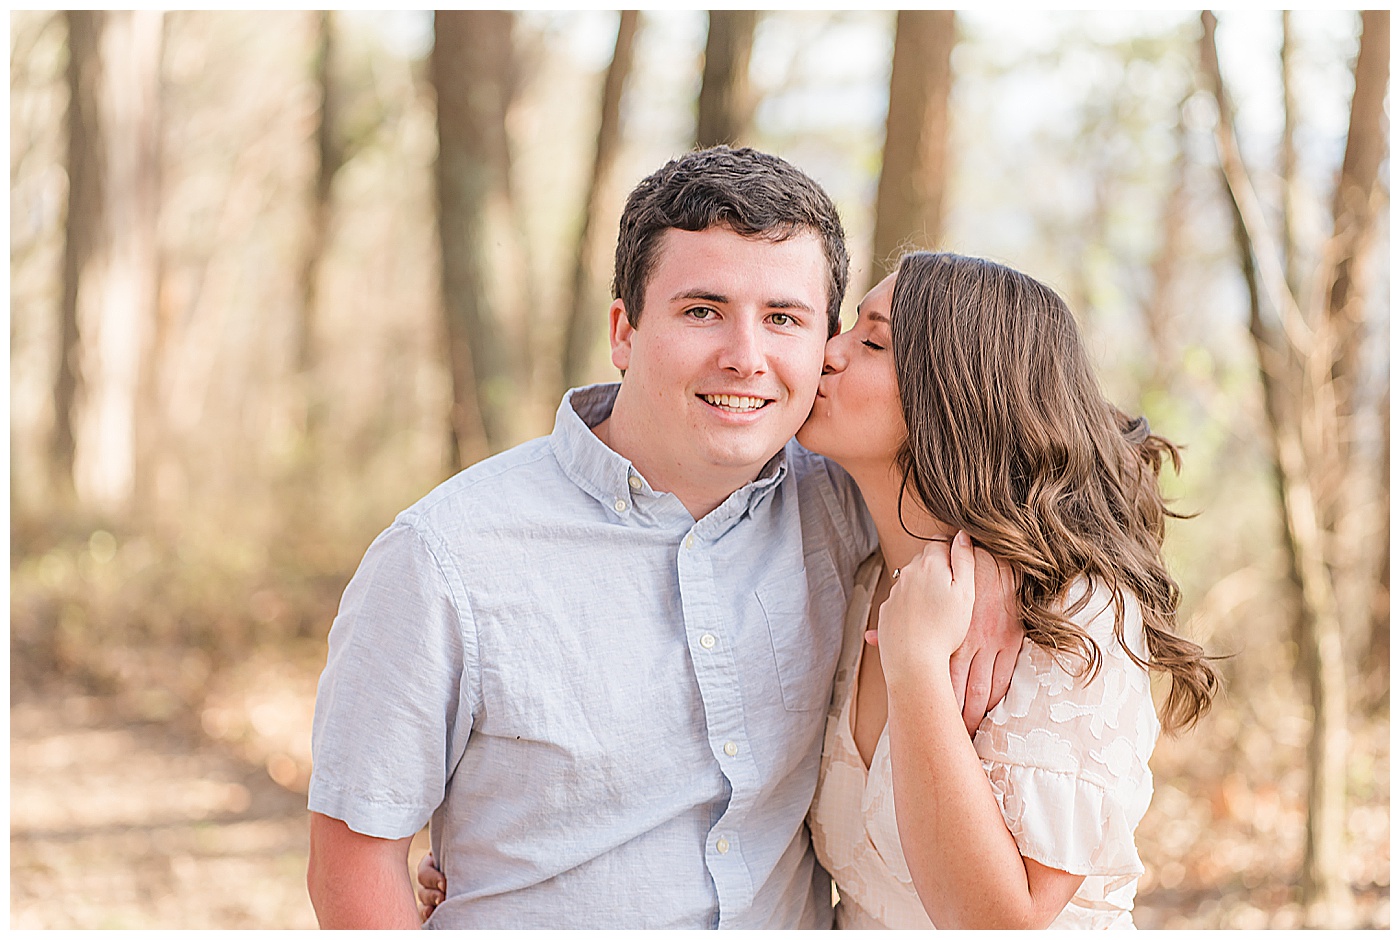 Chilhowee Engagement Photos at Sunset: Dylan + Heather - Chattanooga ...